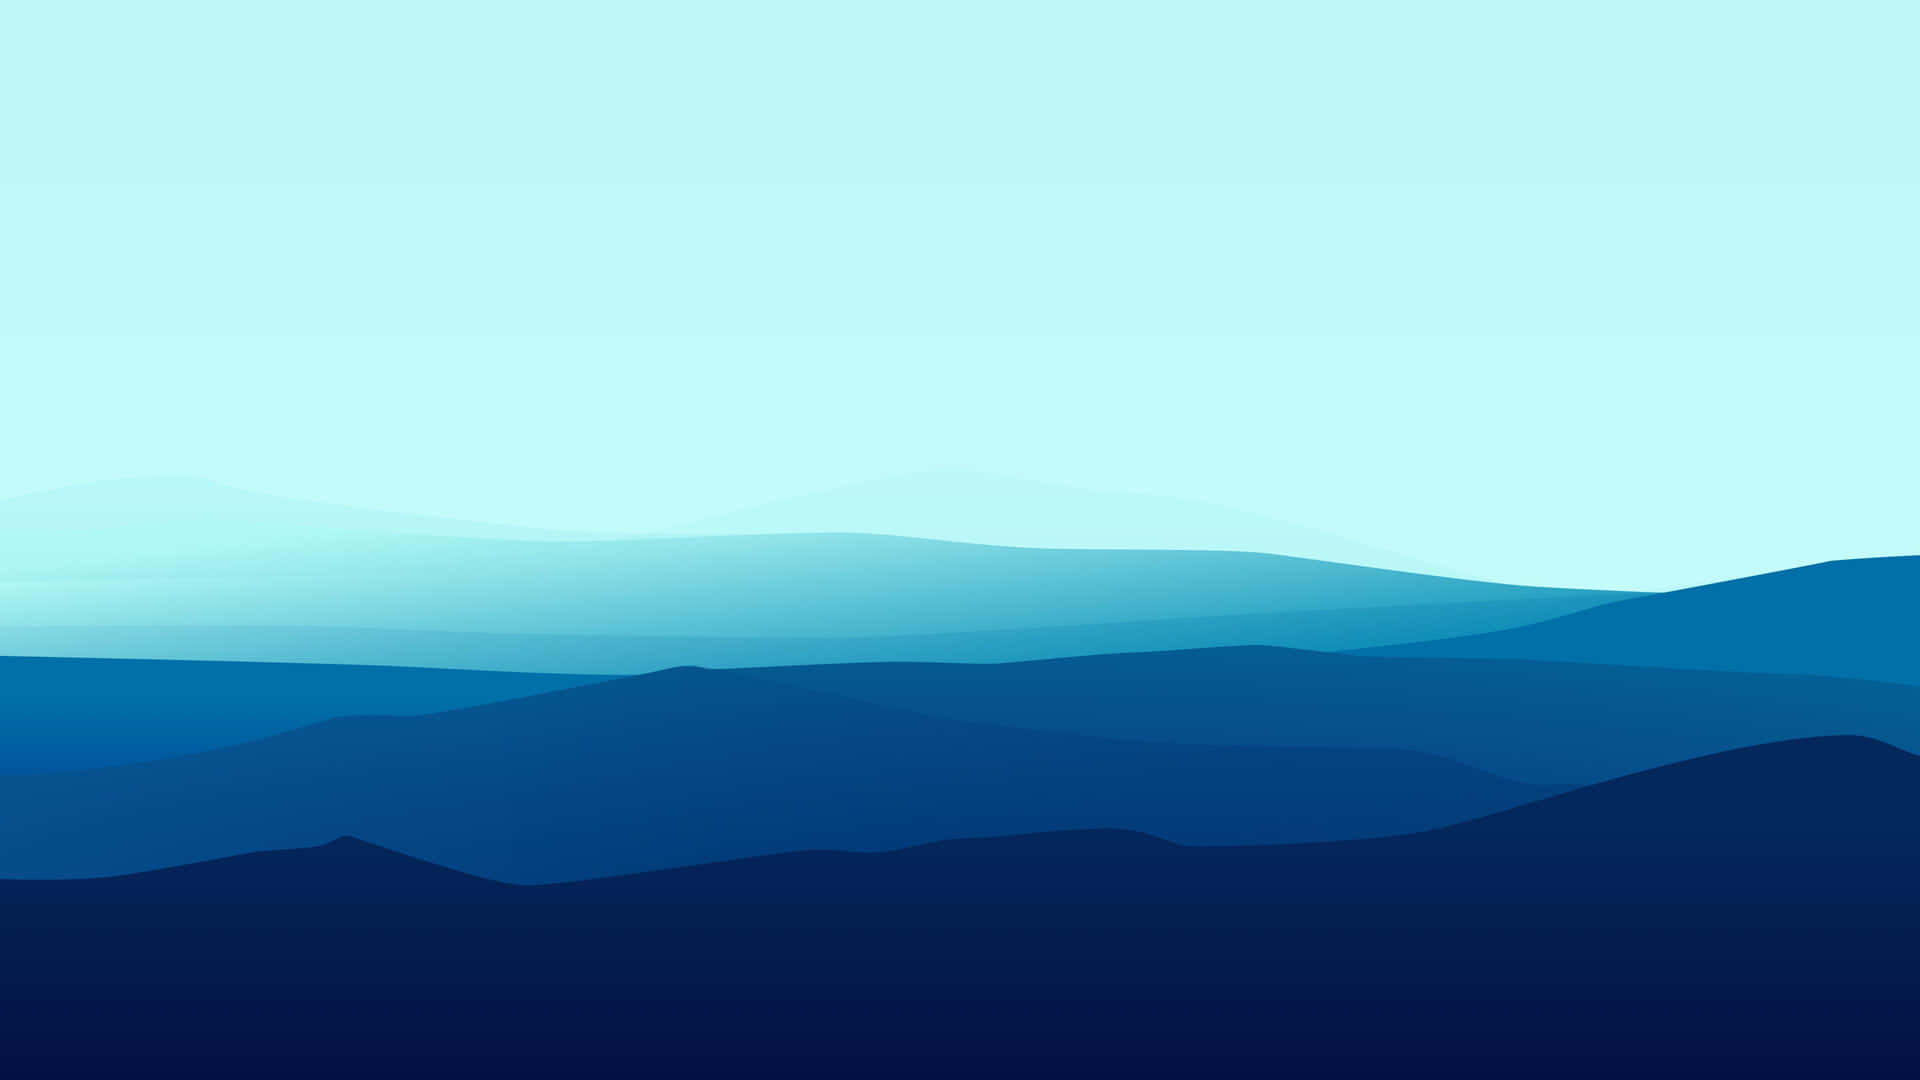 A Blue Background With Mountains And Clouds Wallpaper